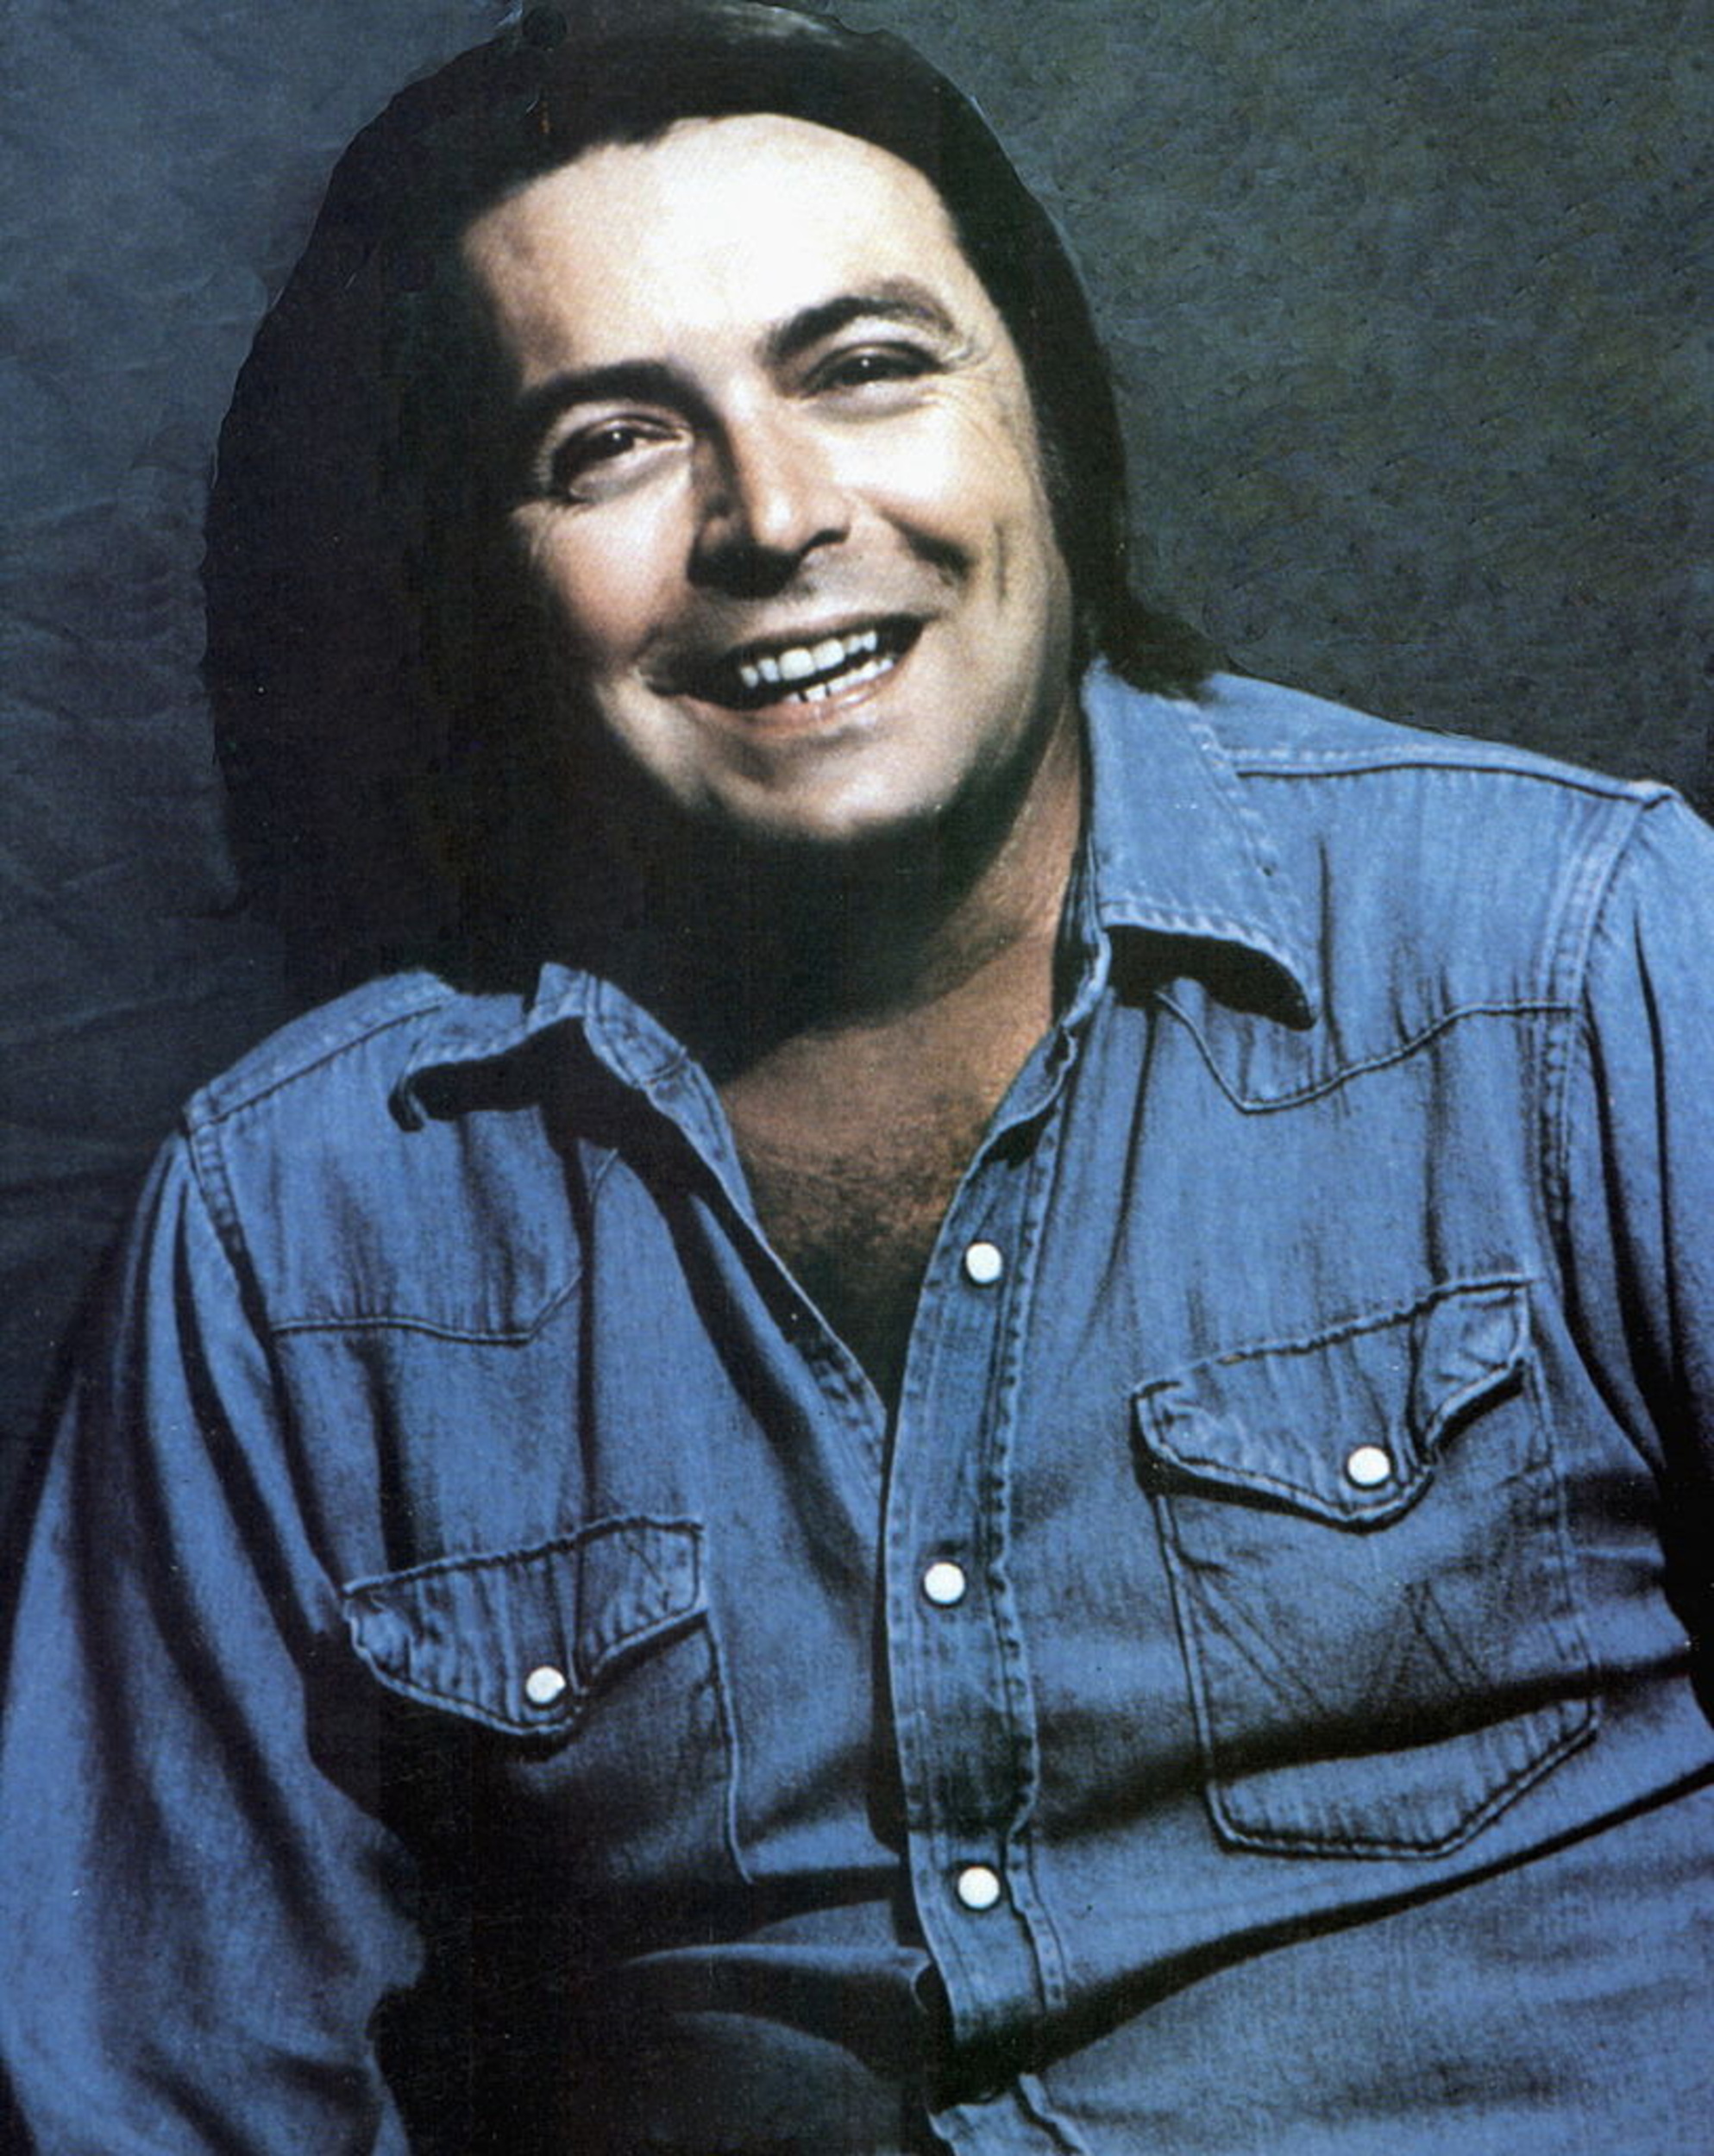 <p>It makes absolutely no sense that Mickey Gilley, the owner of the iconic Gilley's Club immortalized in "Urban Cowboy," isn't in the Country Music Hall of Fame. Especially considering that he was a successful country artist who continued to make music until shortly before his death in 2022. </p><p>You may also like: <a href='https://www.yardbarker.com/entertainment/articles/ranking_bruce_springsteens_studio_albums/s1__38431676'>Ranking Bruce Springsteen's studio albums</a></p>